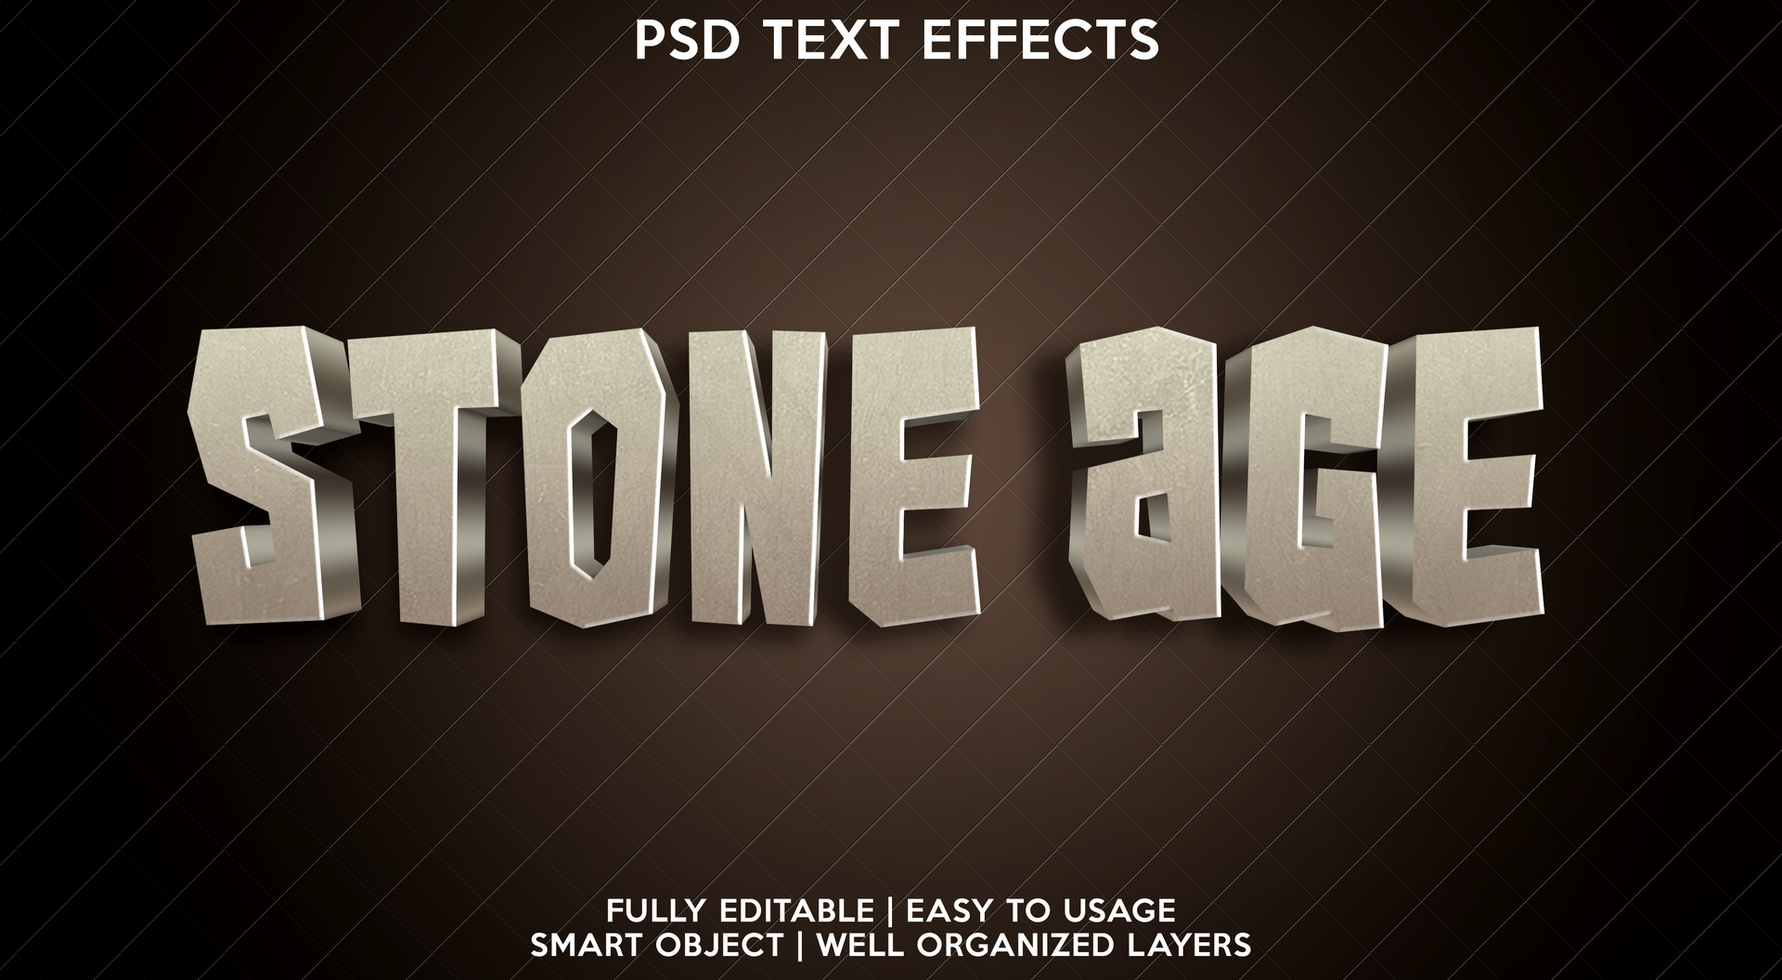 stone age text effect template psd